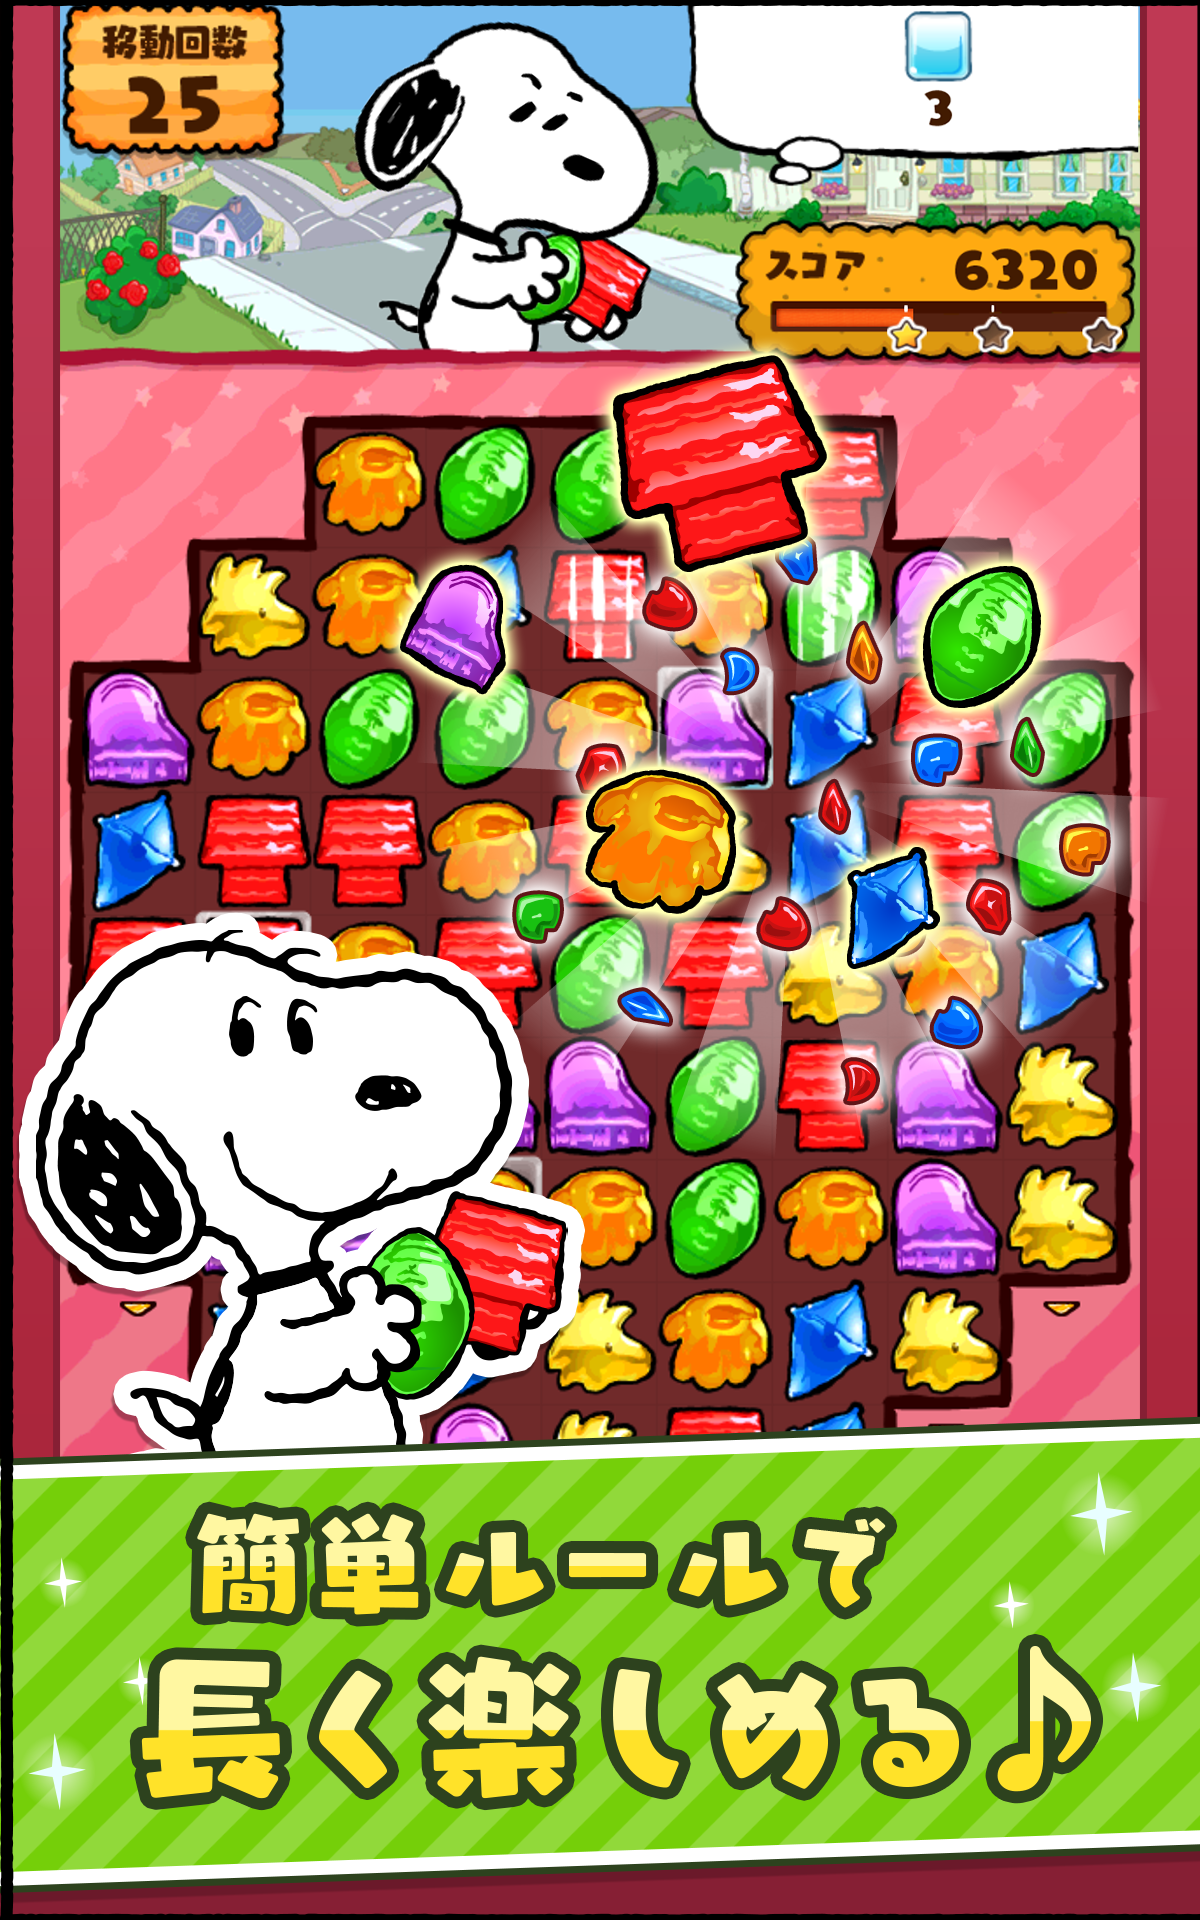 Screenshot 1 of Snoopy Drops : Snoopy Puzzlespiel/Puzzle 1.9.53